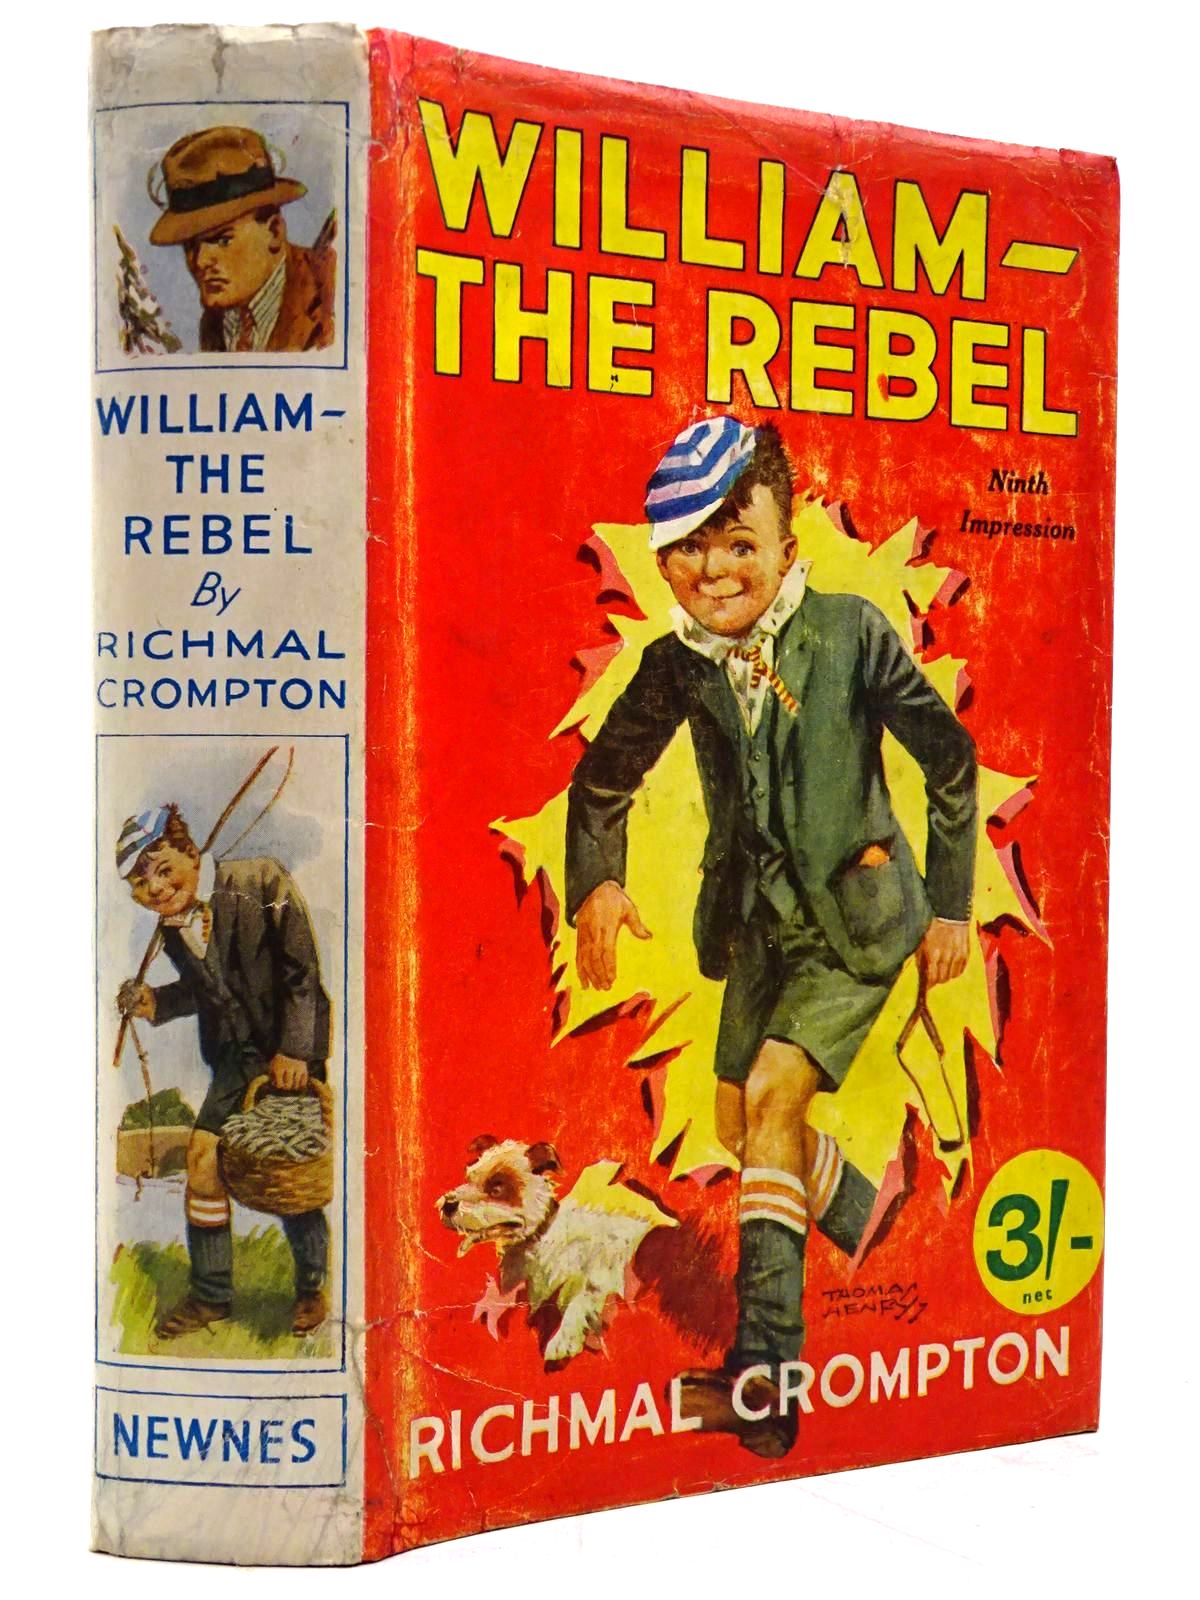 Cover of WILLIAM-THE REBEL by Richmal Crompton